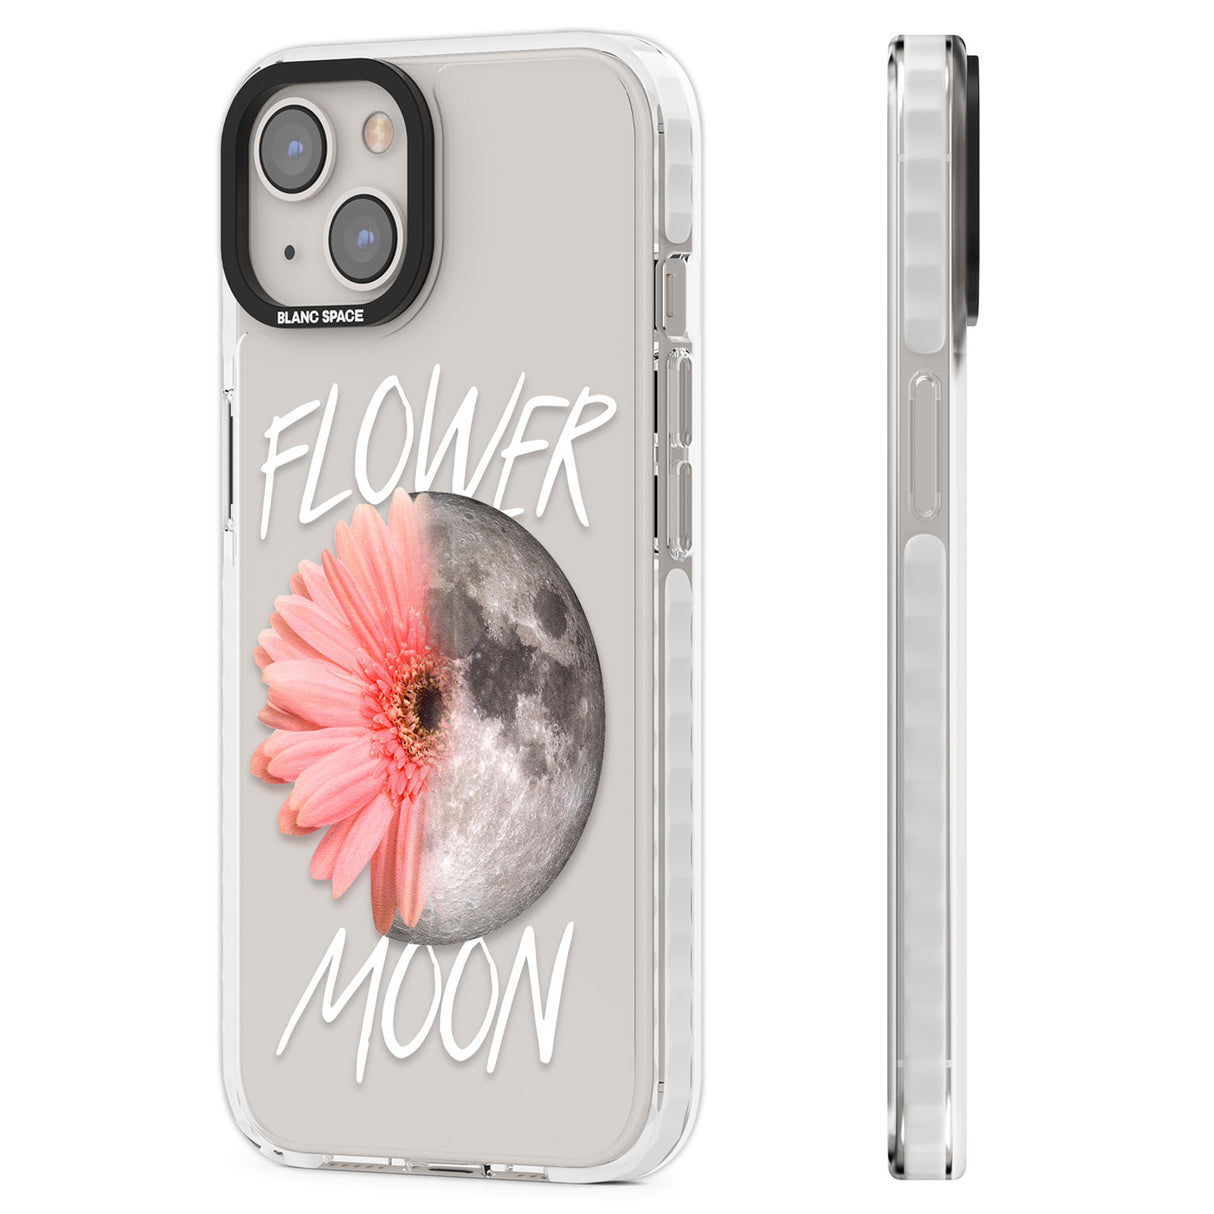 Flower Moon Clear Impact Phone Case for iPhone 13, iPhone 14, iPhone 15